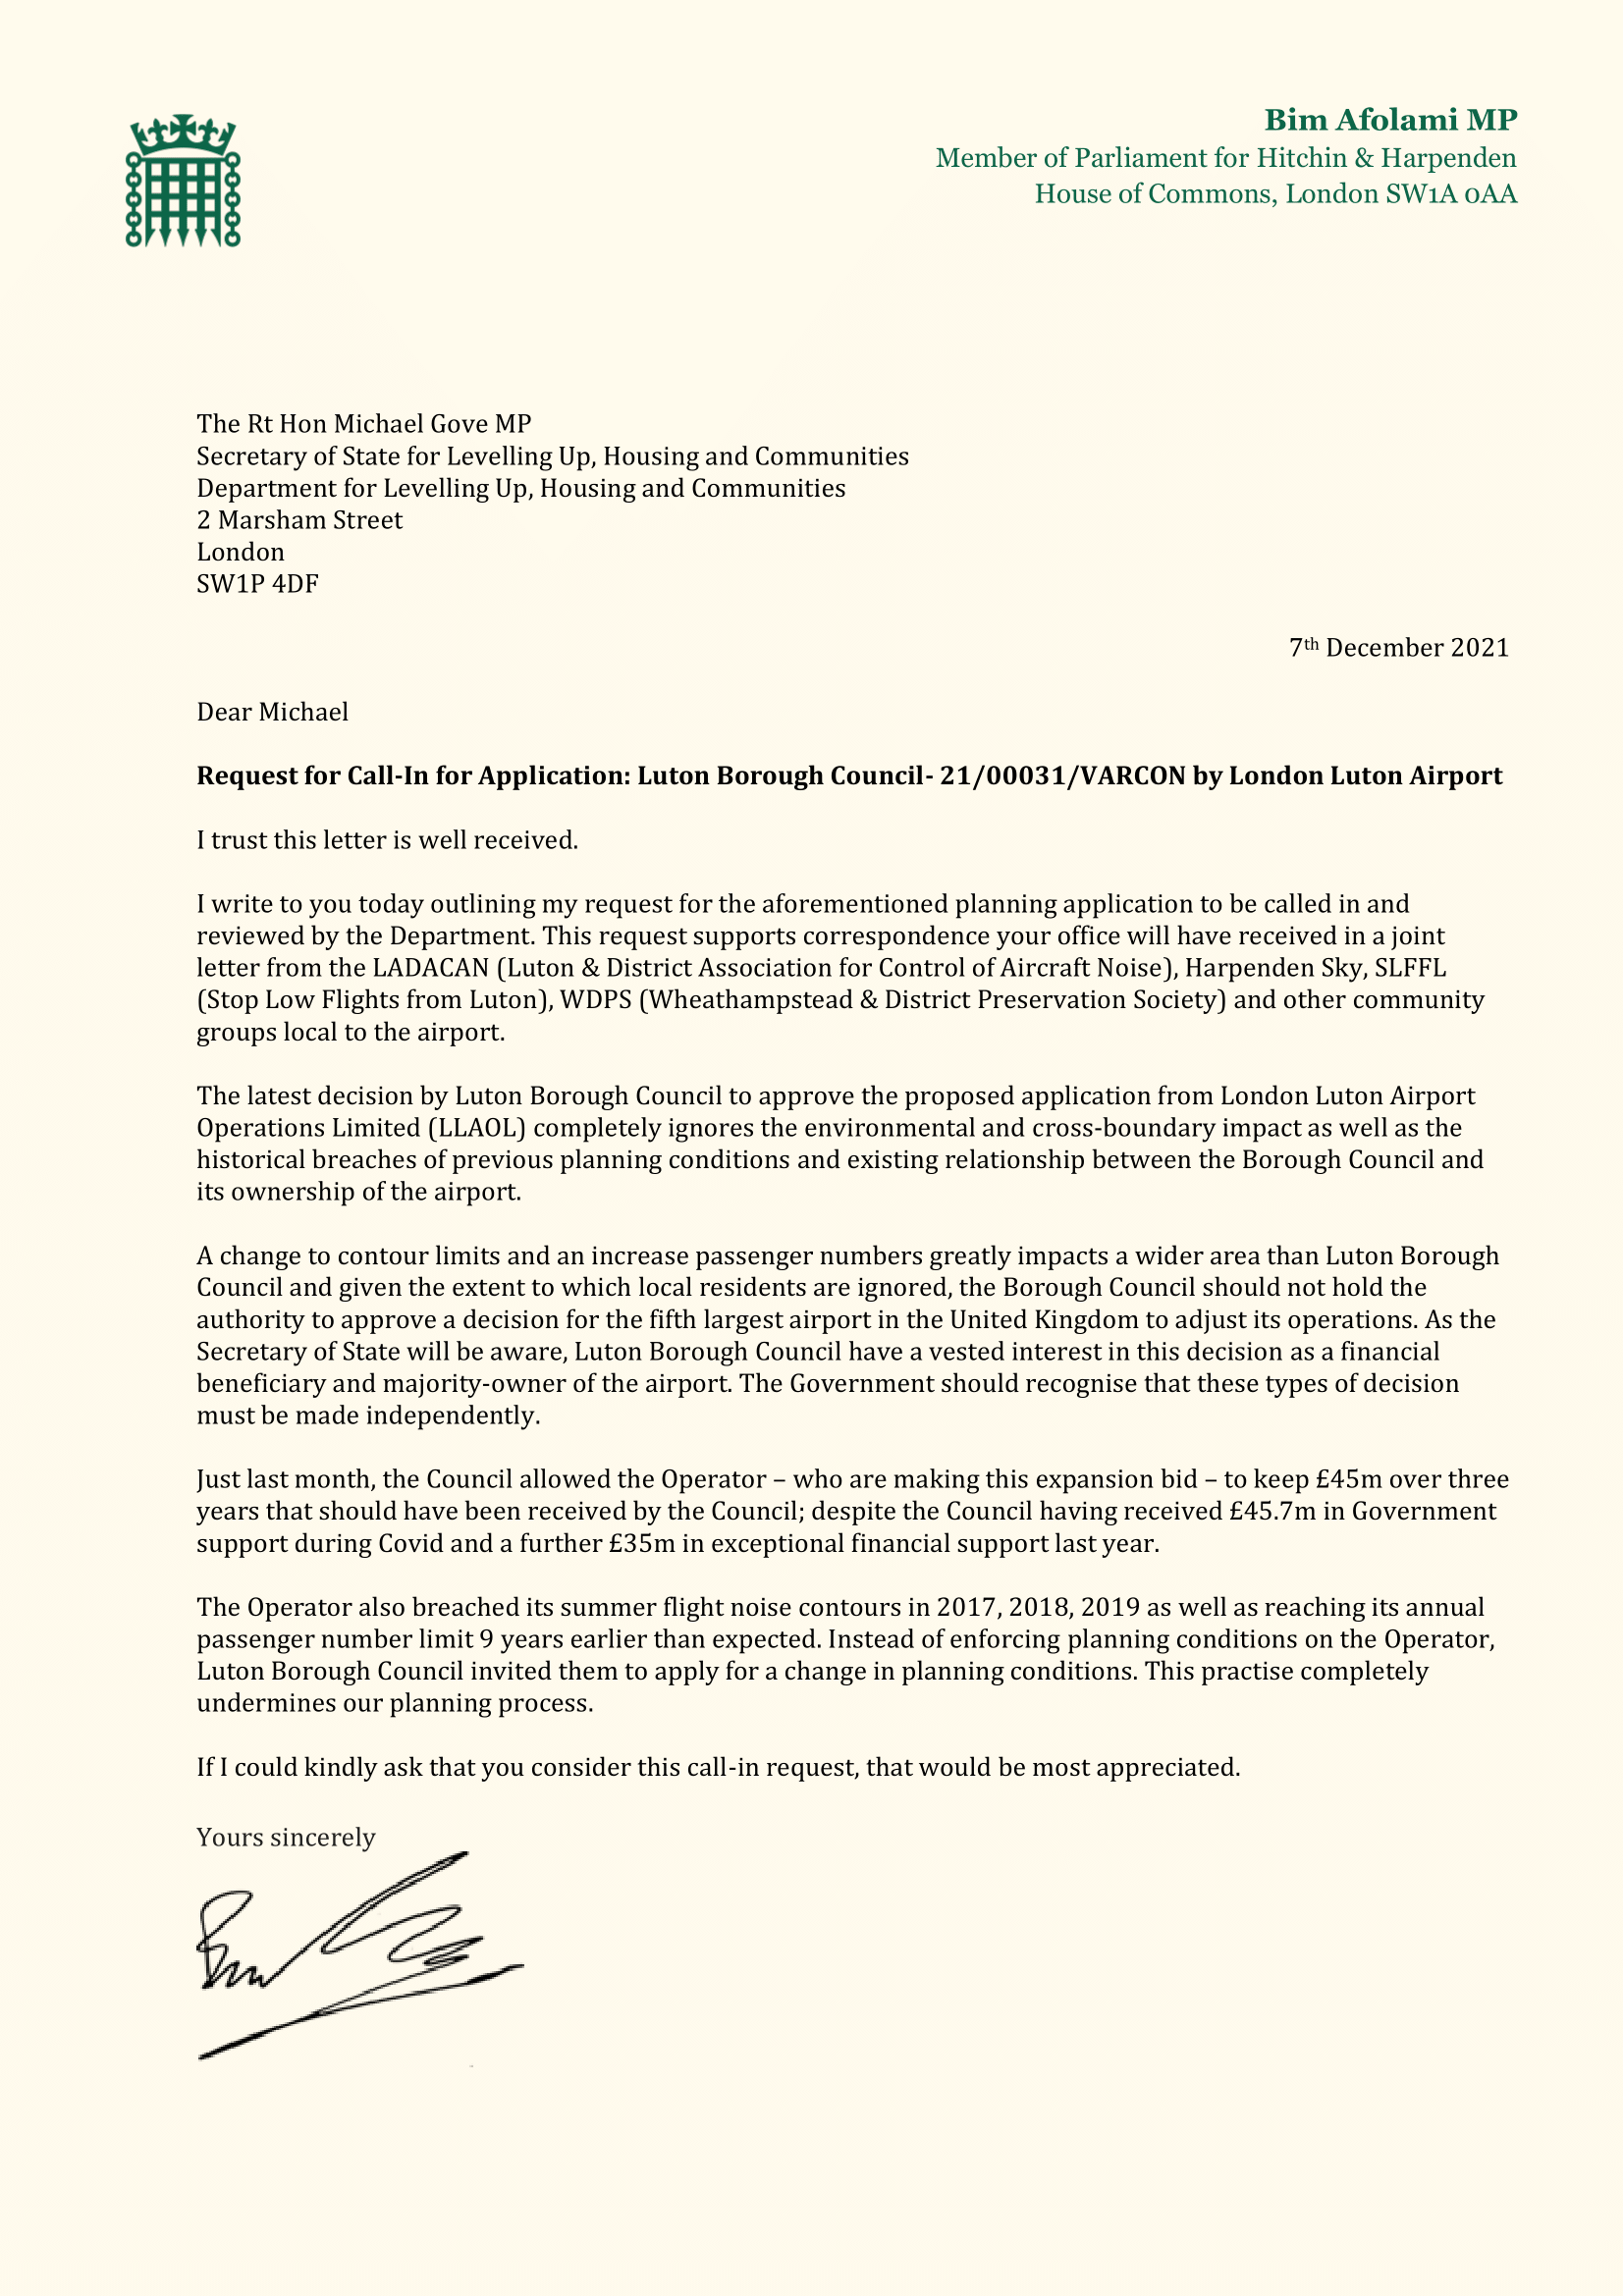 Letter to the Secretary of State